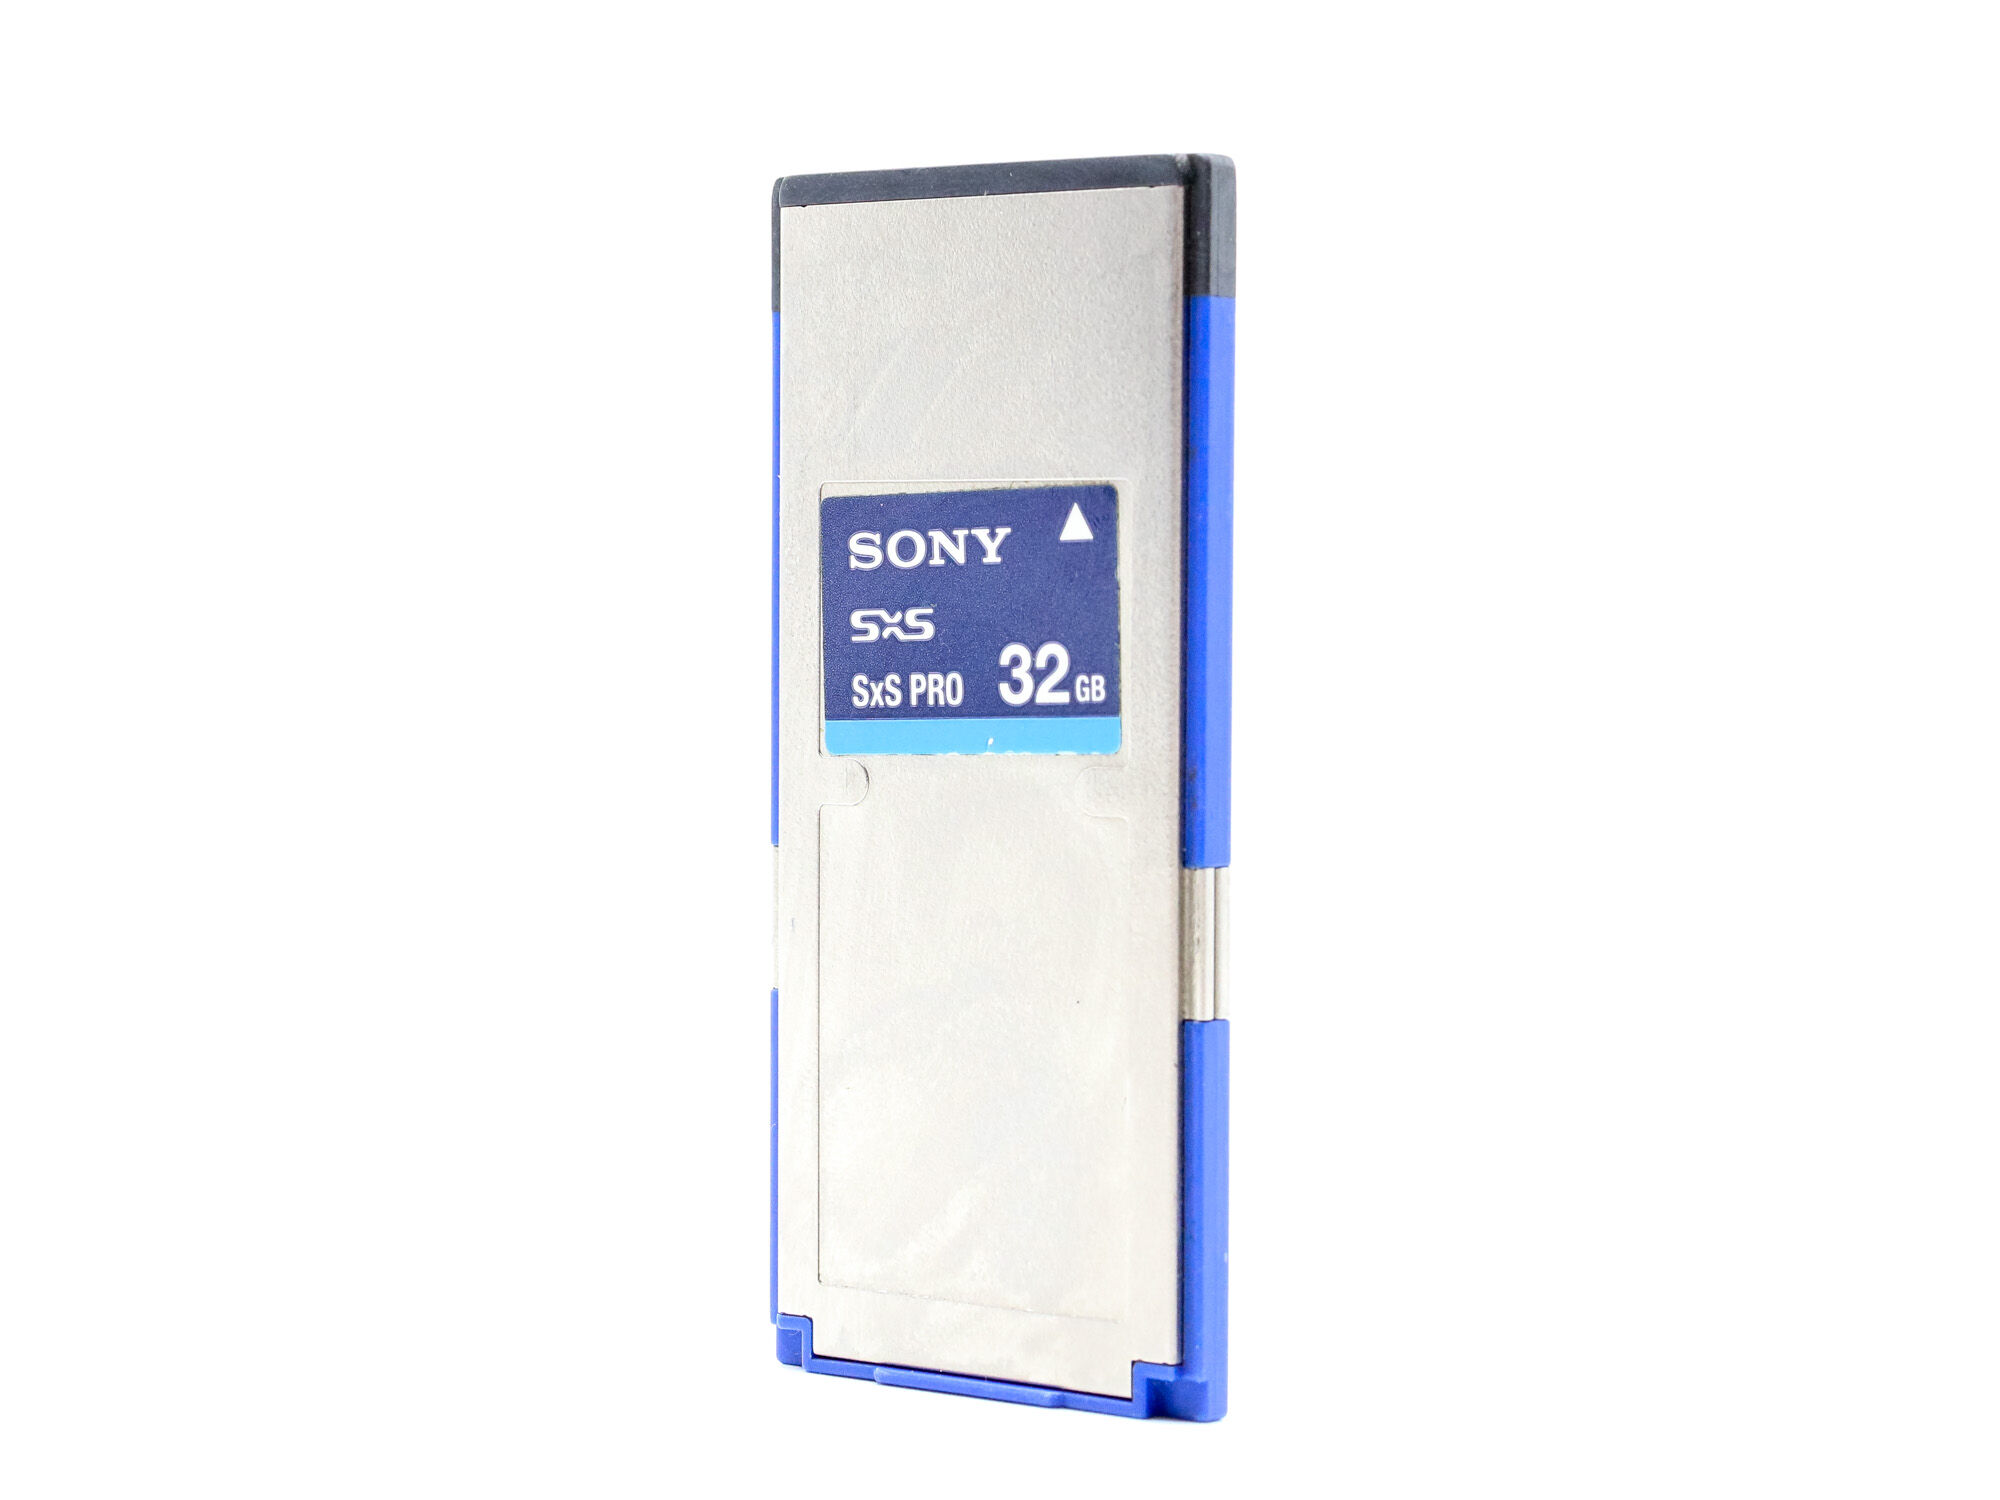 Sony 32GB SxS Pro Memory Card (Condition: Excellent)